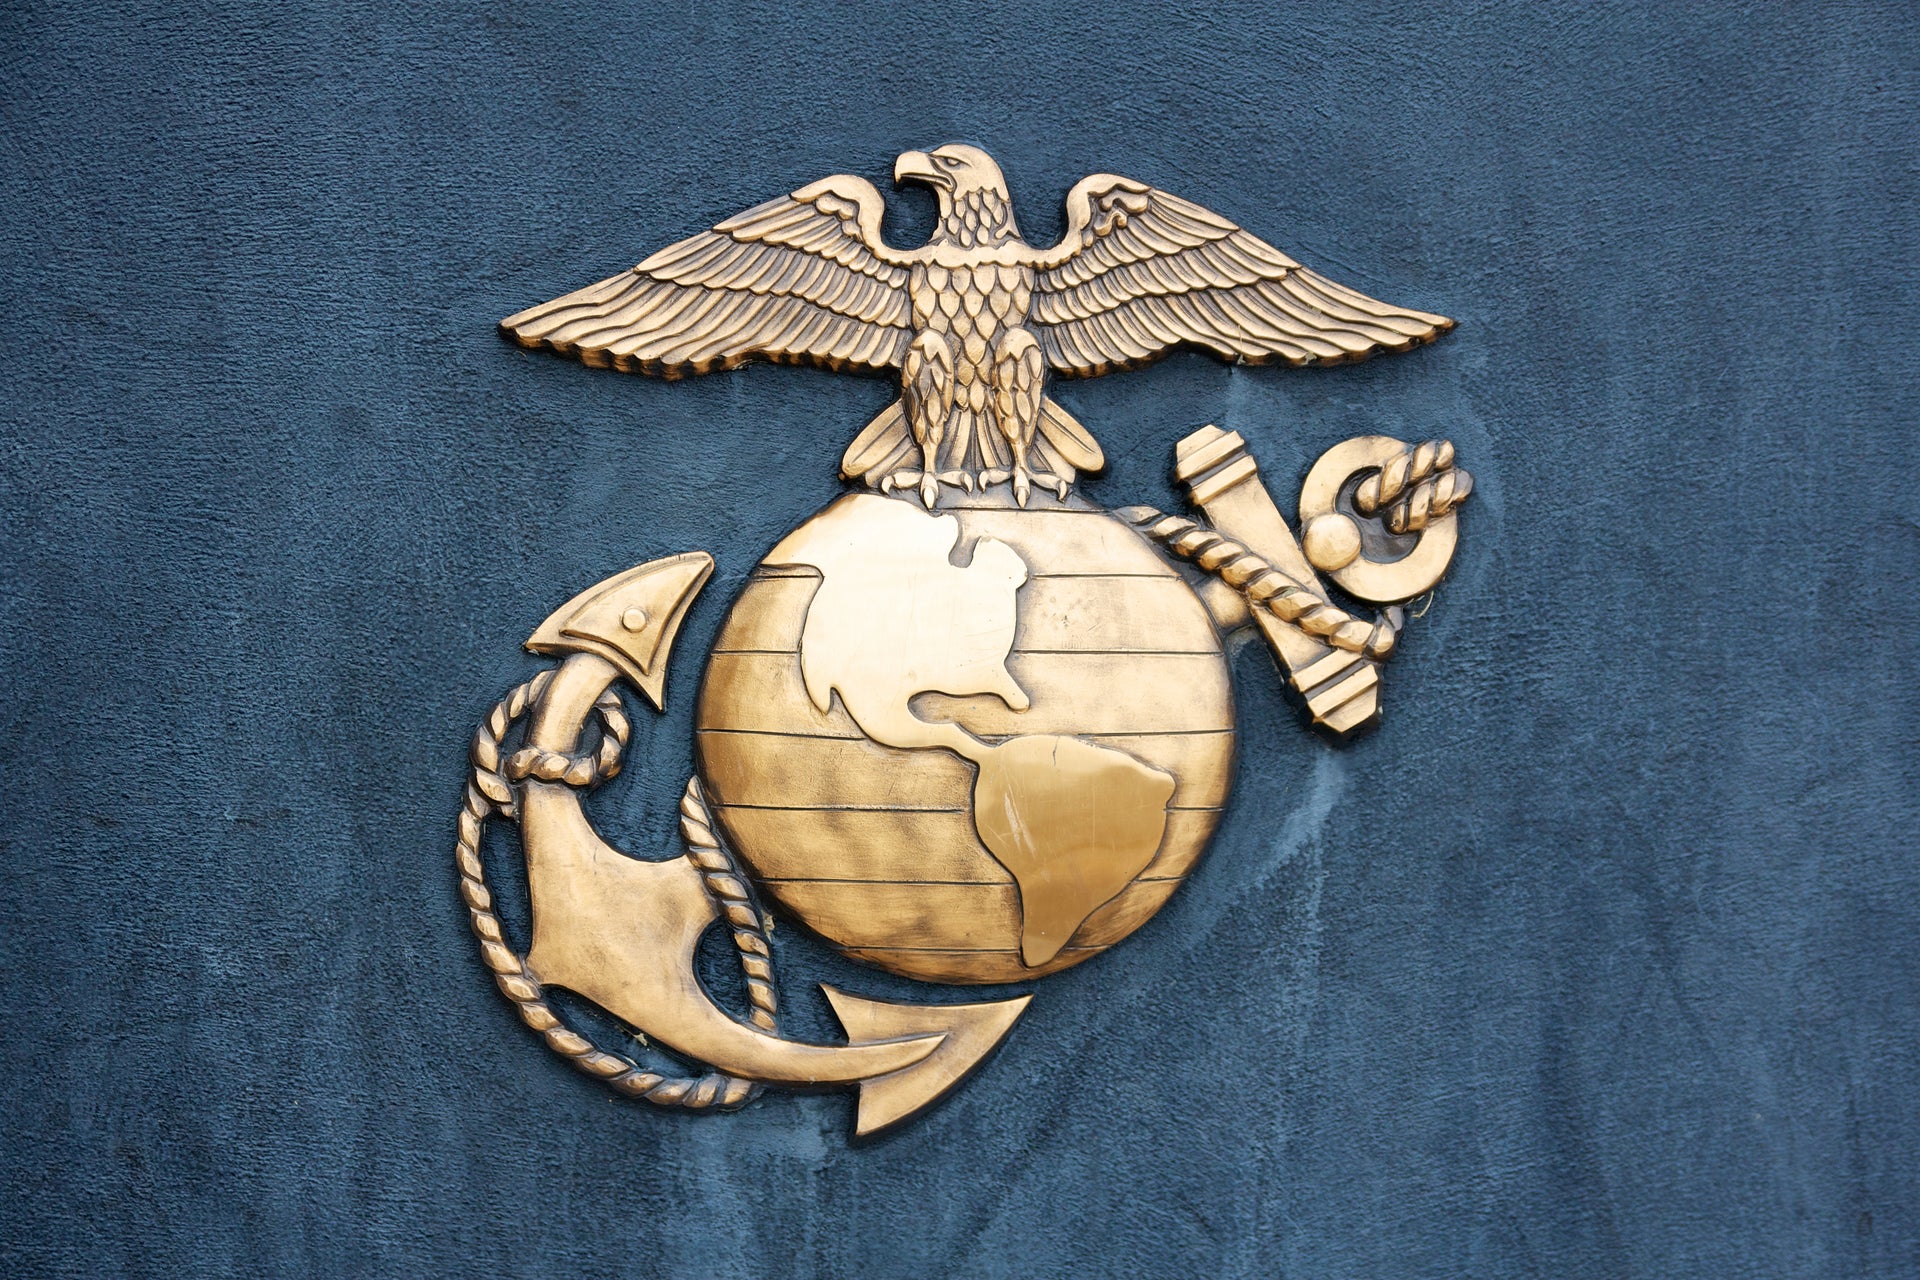 About the US Marine Corps